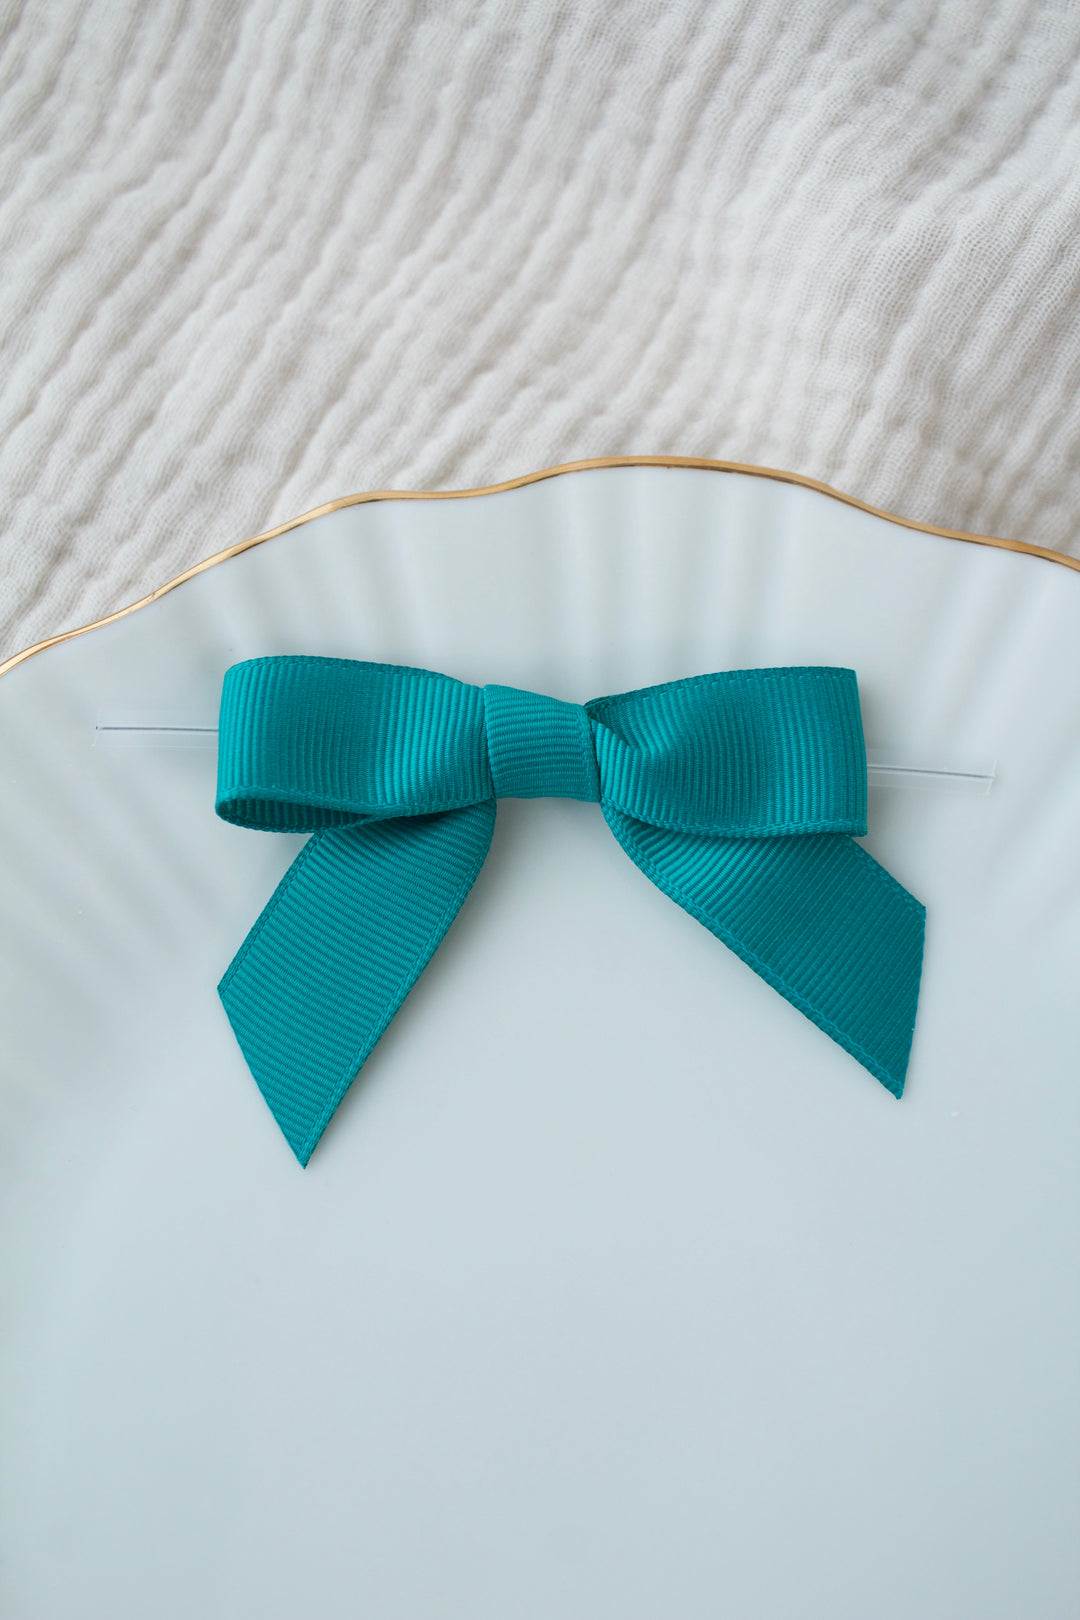 Emerald - Grosgrains pre-tied bows (20pcs) with clear twist tie